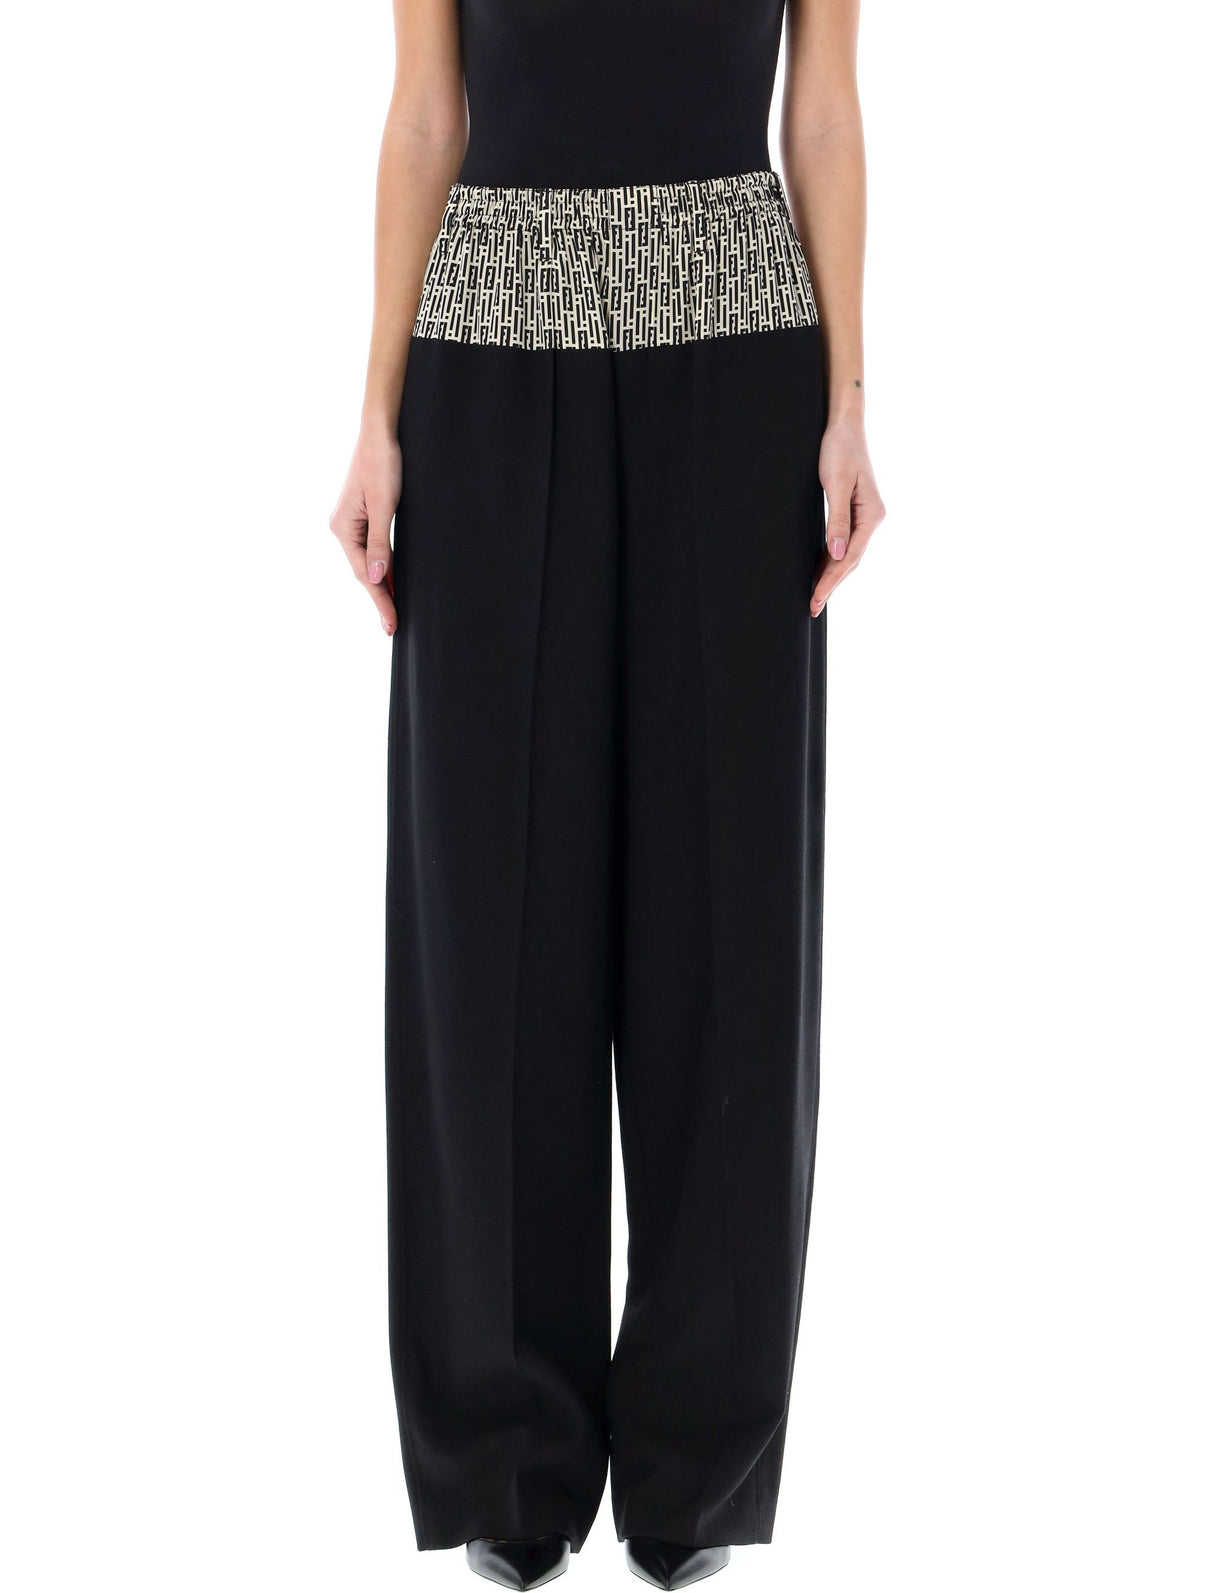 FENDI Black Wool Cigarette Pants for Women with High Waist and Peplum Detail